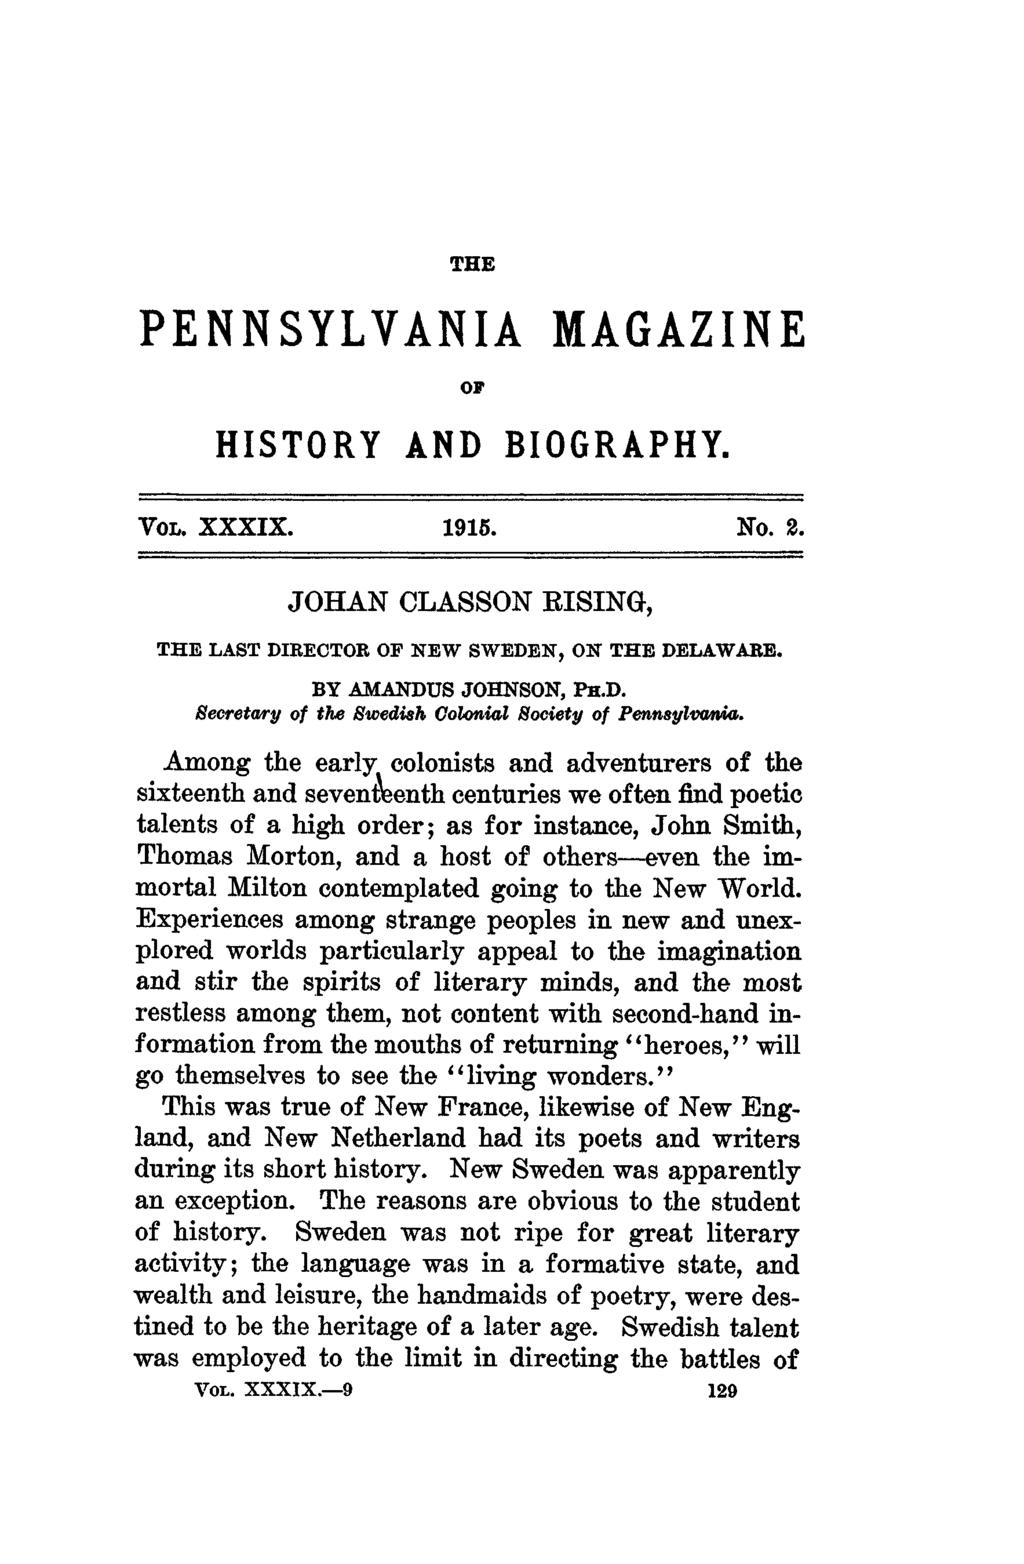 THE PENNSYLVANIA MAGAZINE OF HISTORY AND 